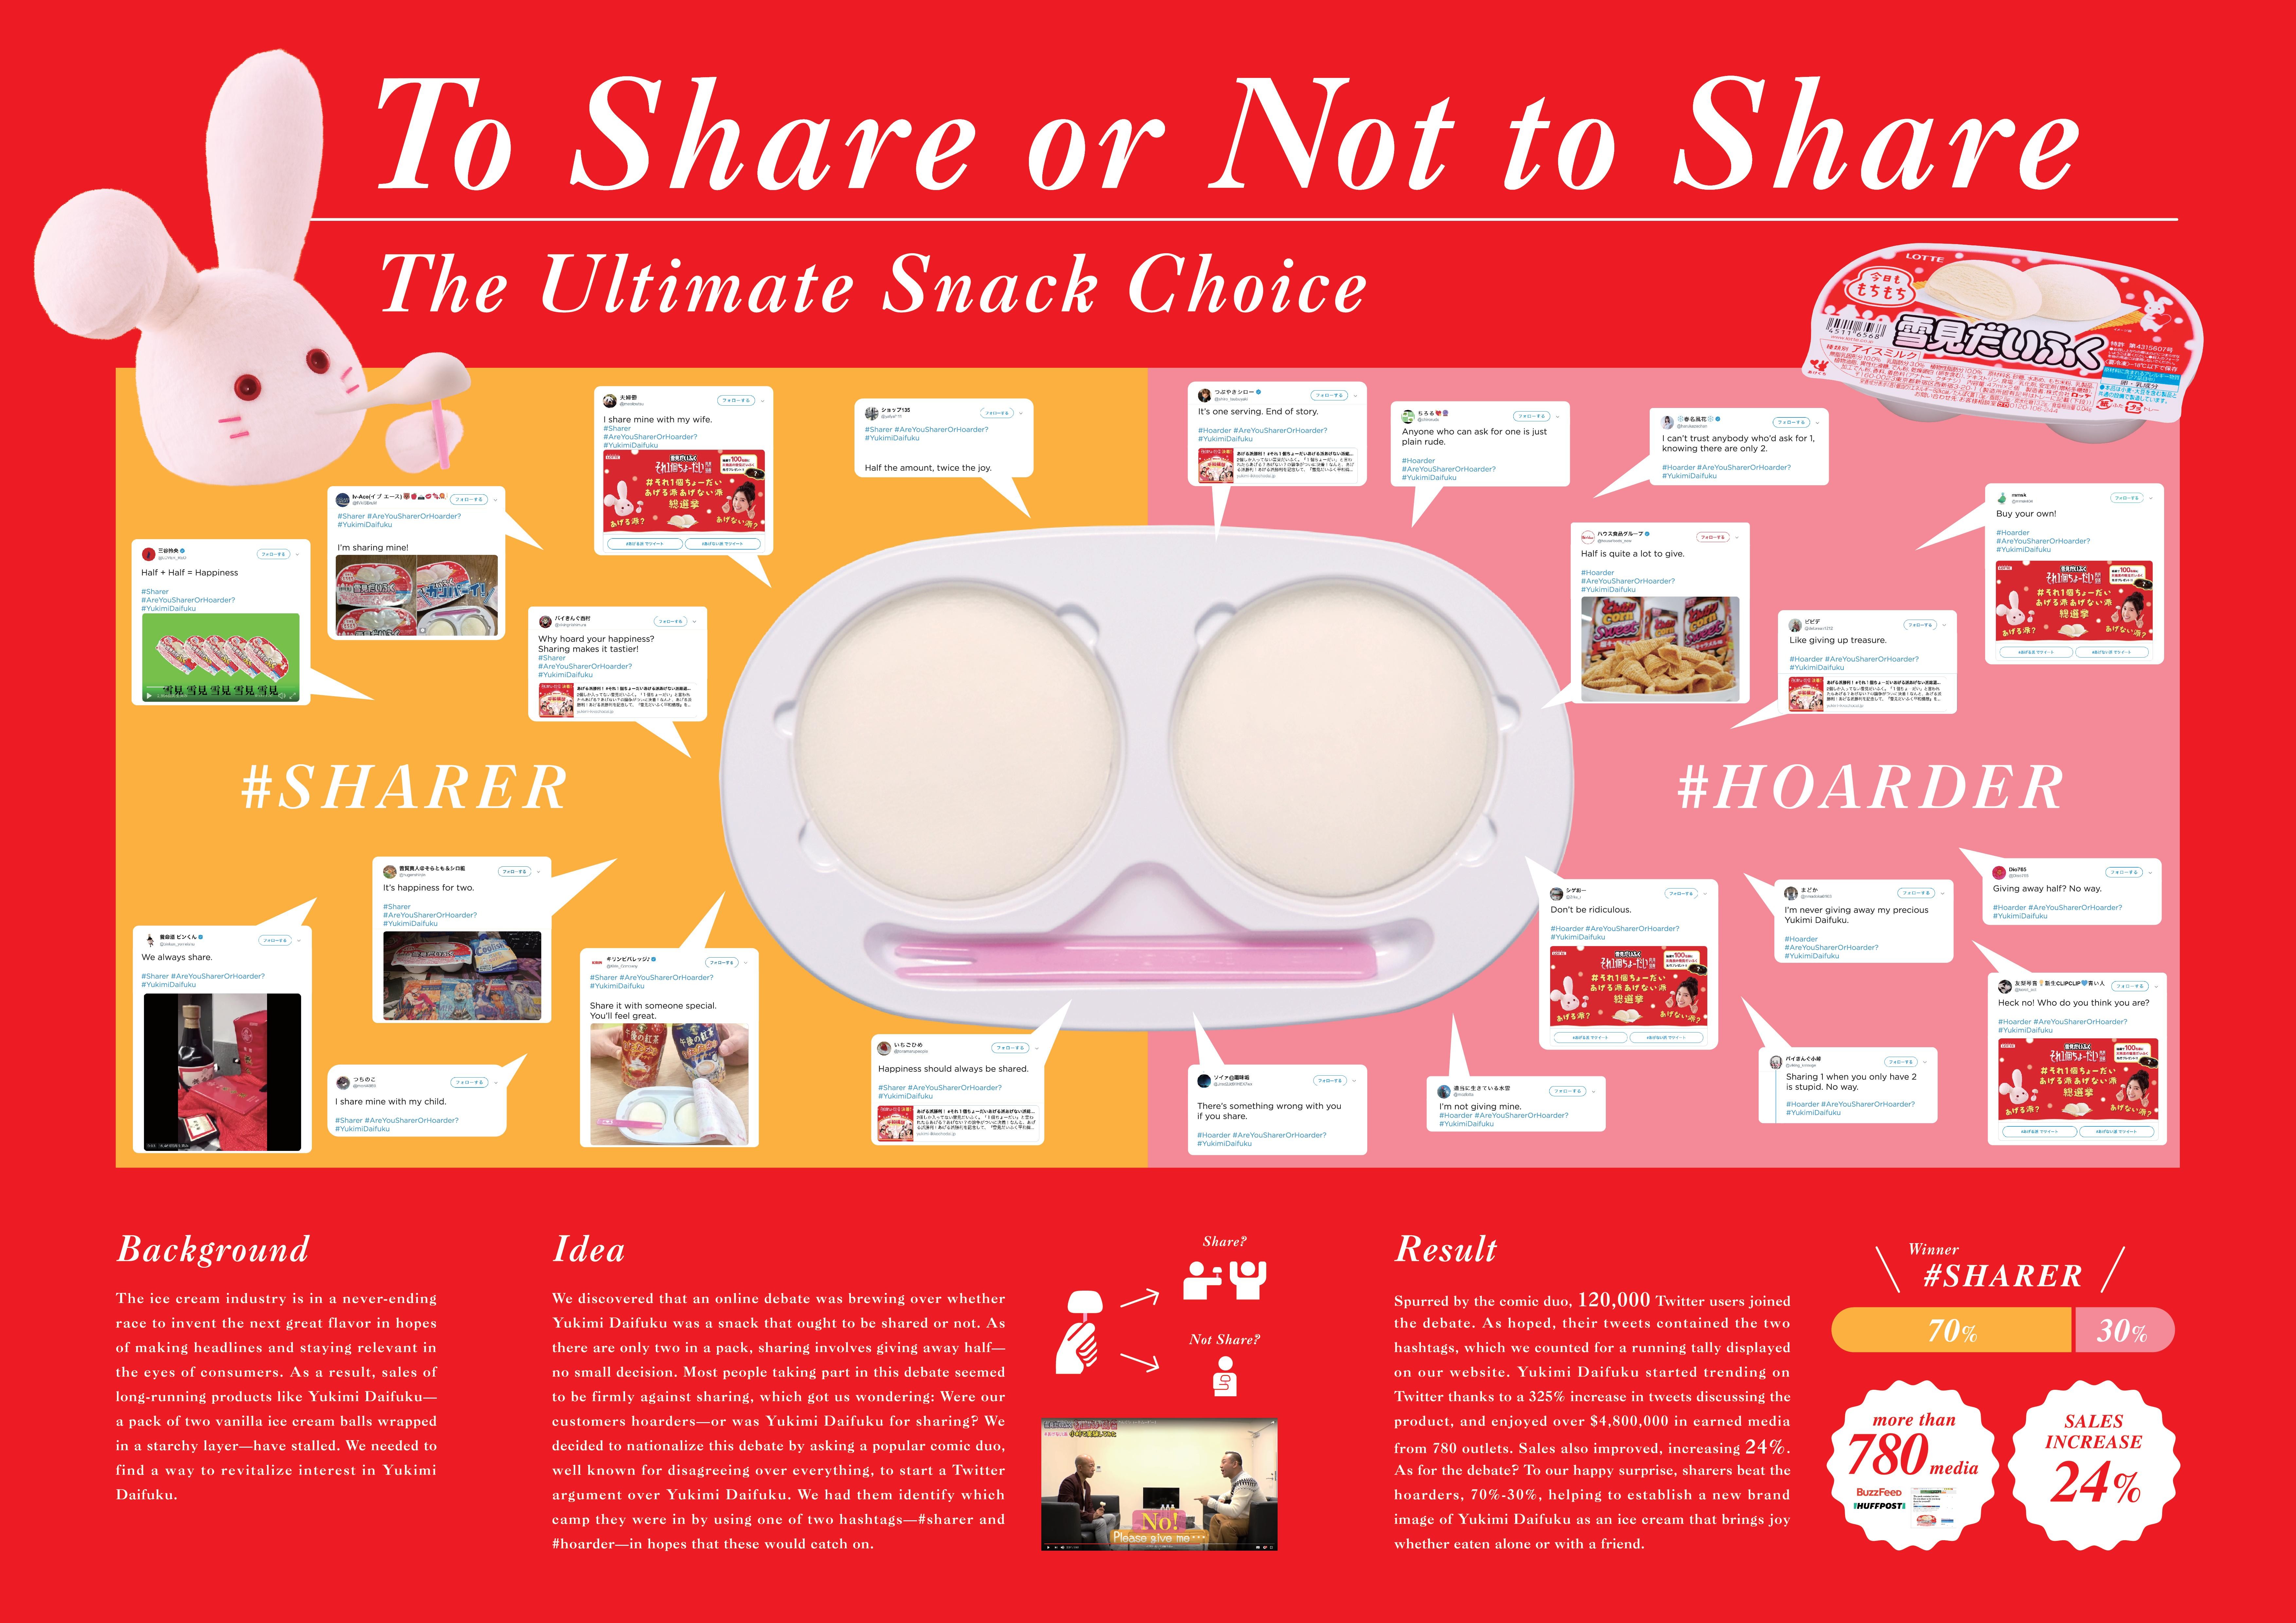 To Share or Not to Share